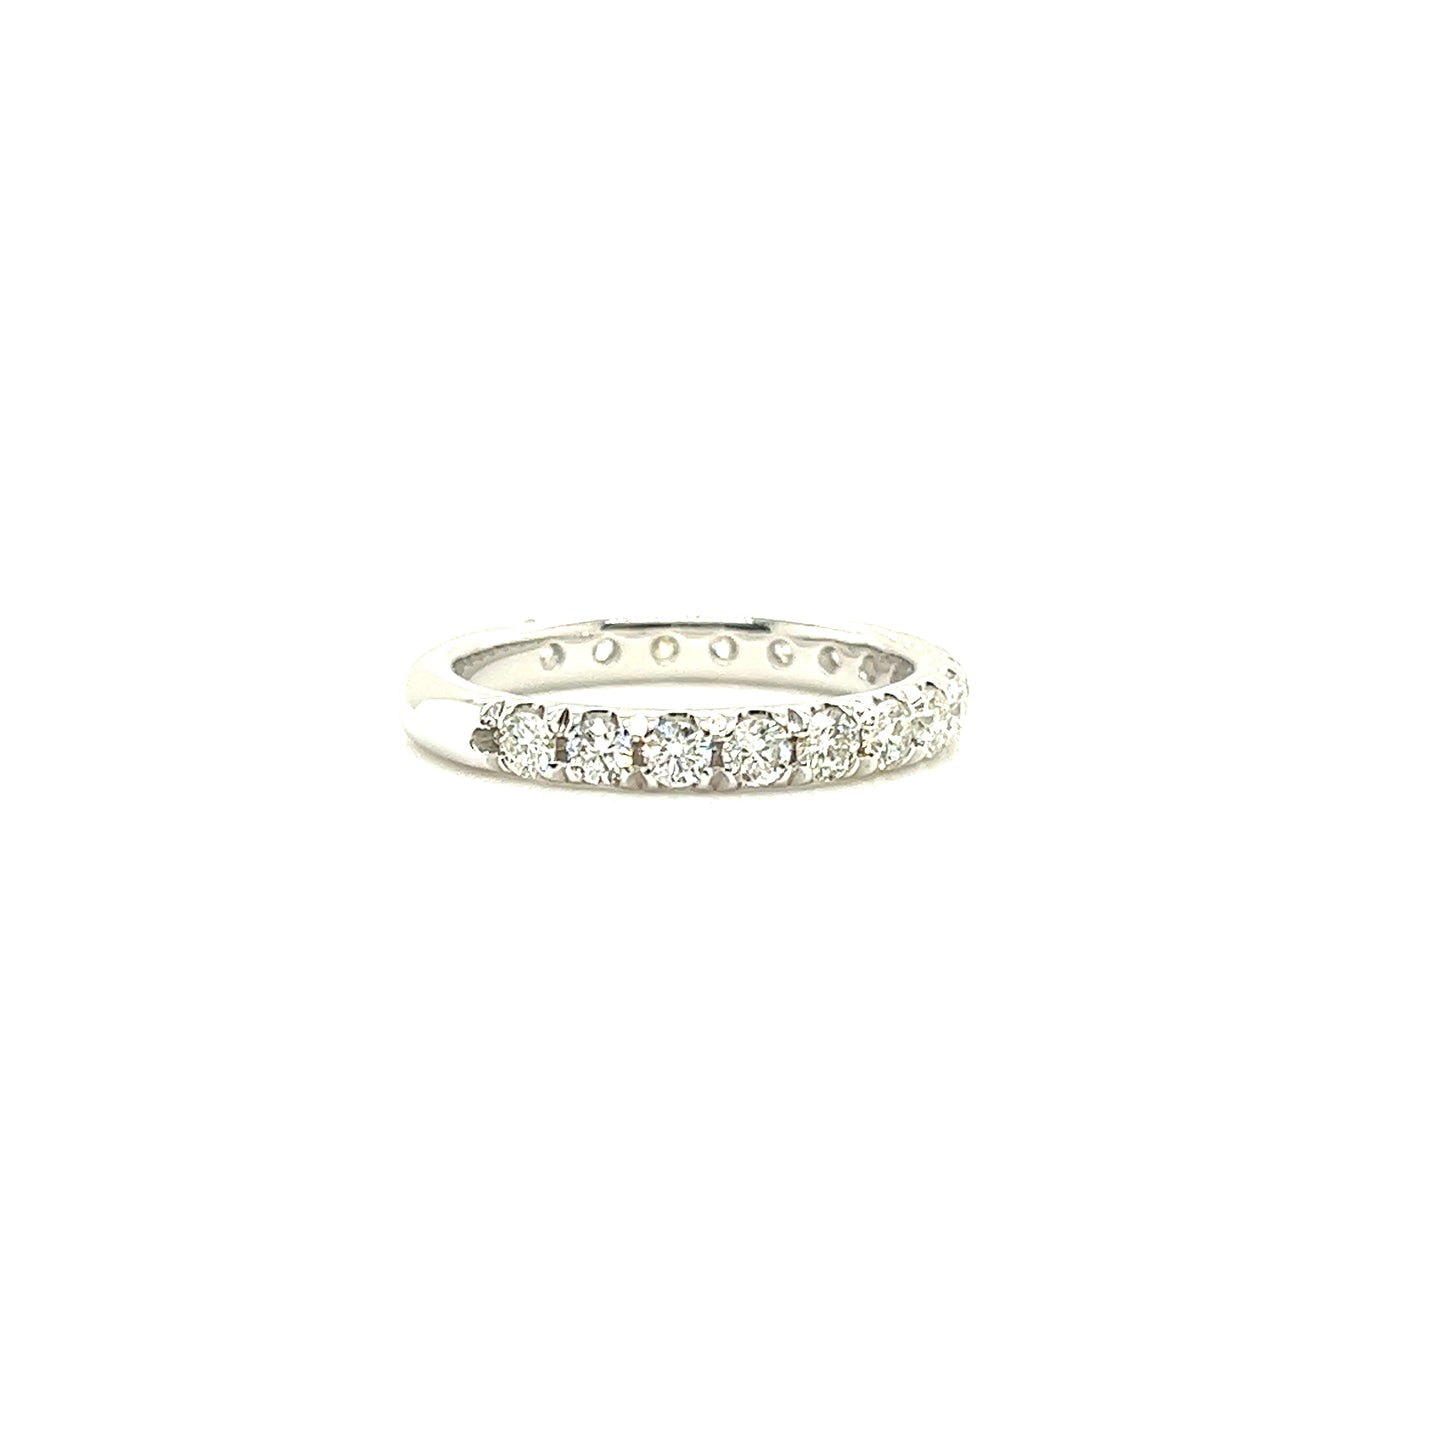 French-set Diamond Ring with 1ctw of Diamonds in 14K White Gold Left Side View